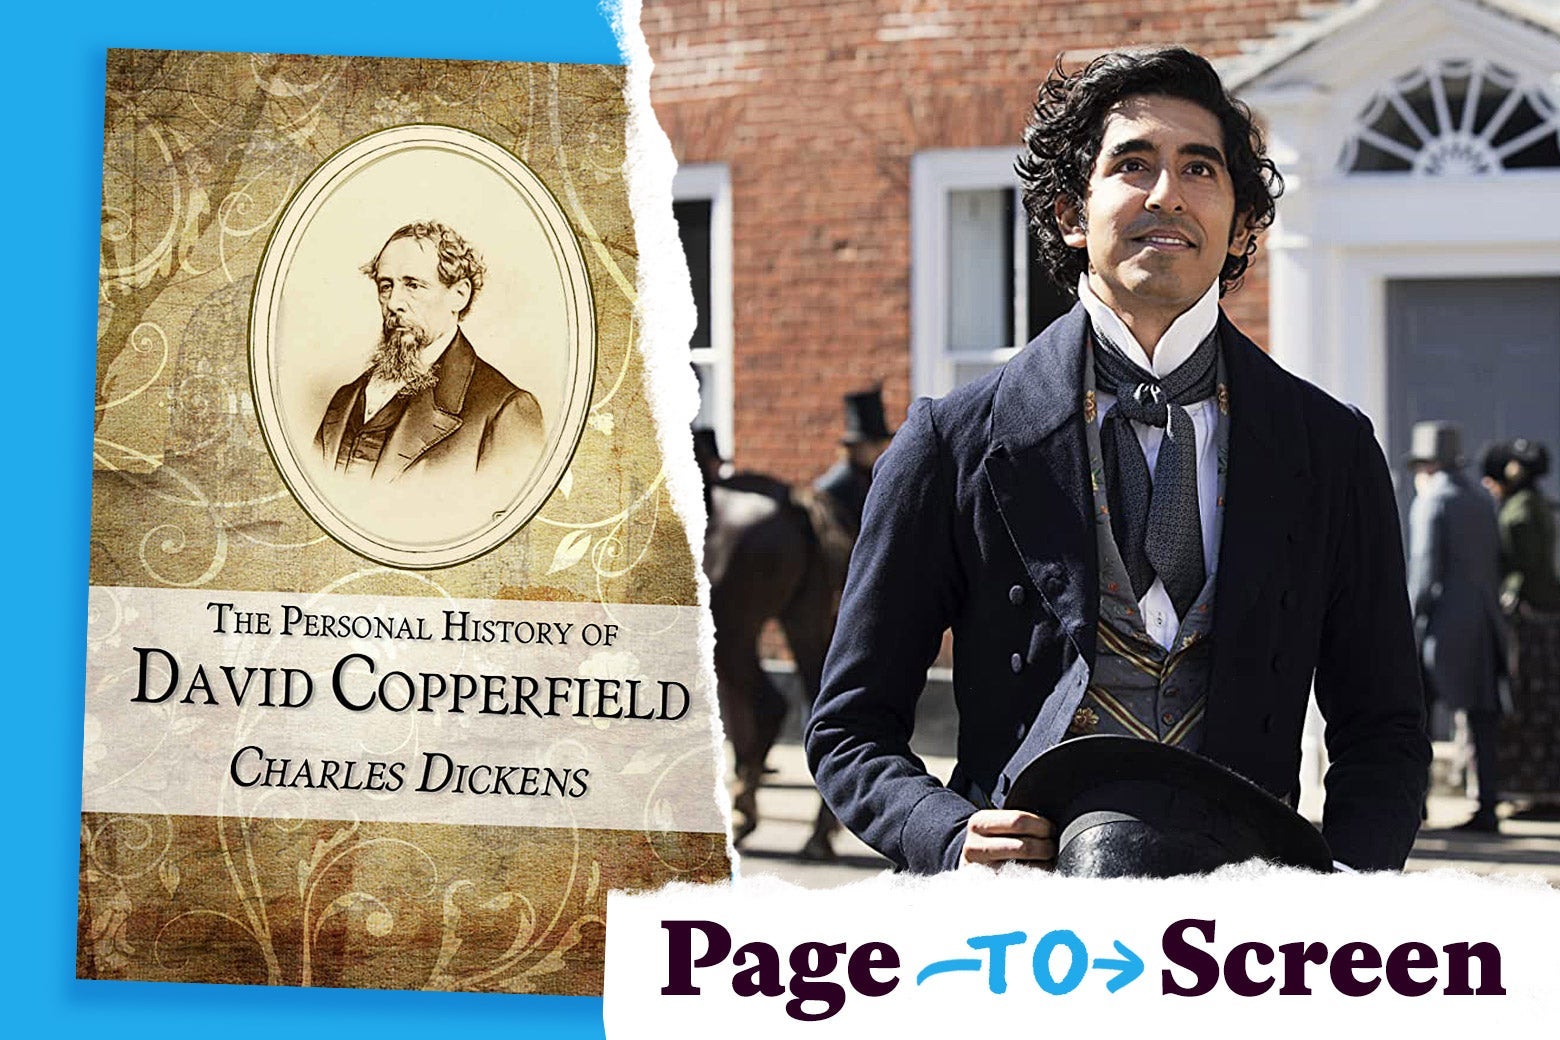 David Copperfield book cover next to a still of Dev Patel as the title character in the new movie adaptation.